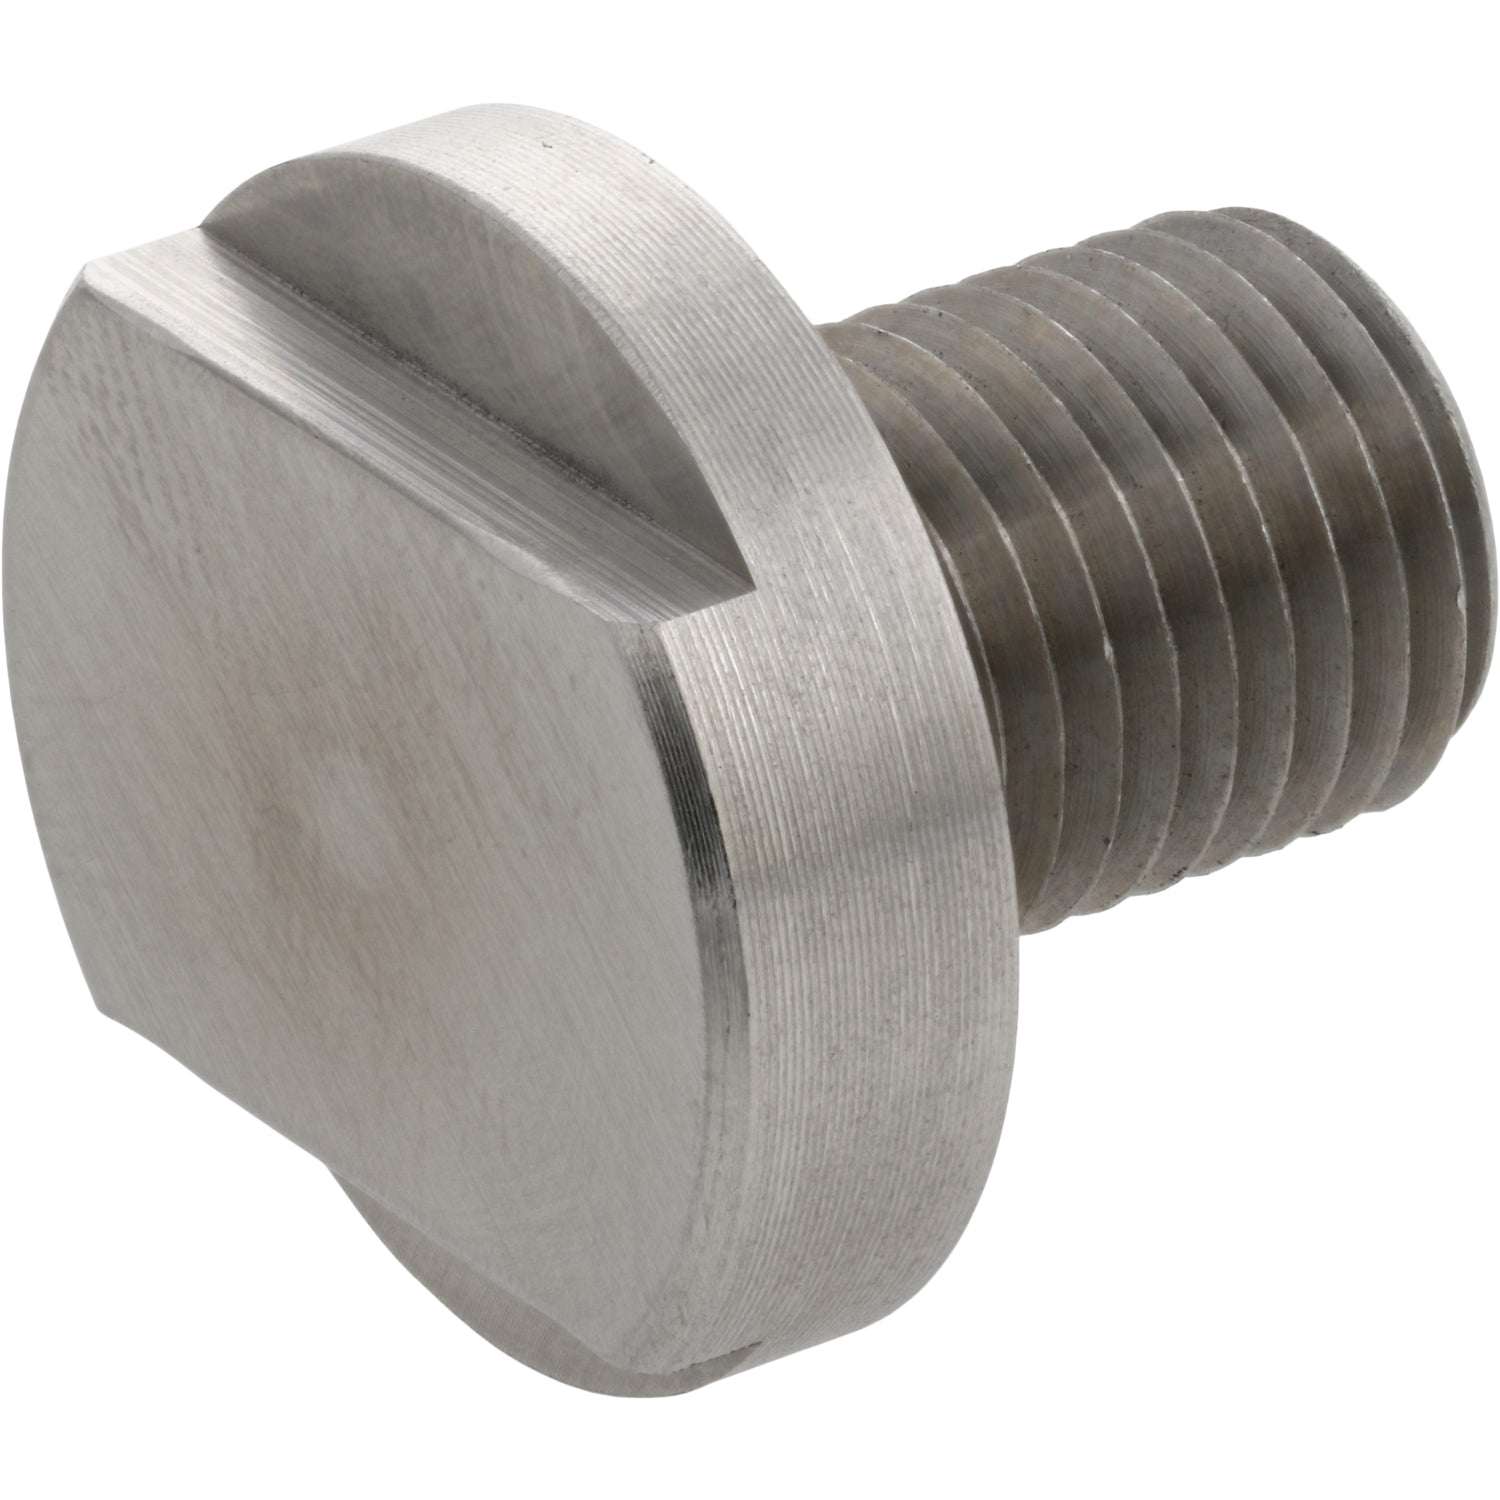 Stainless steel threaded screw with machined flats on white background. 